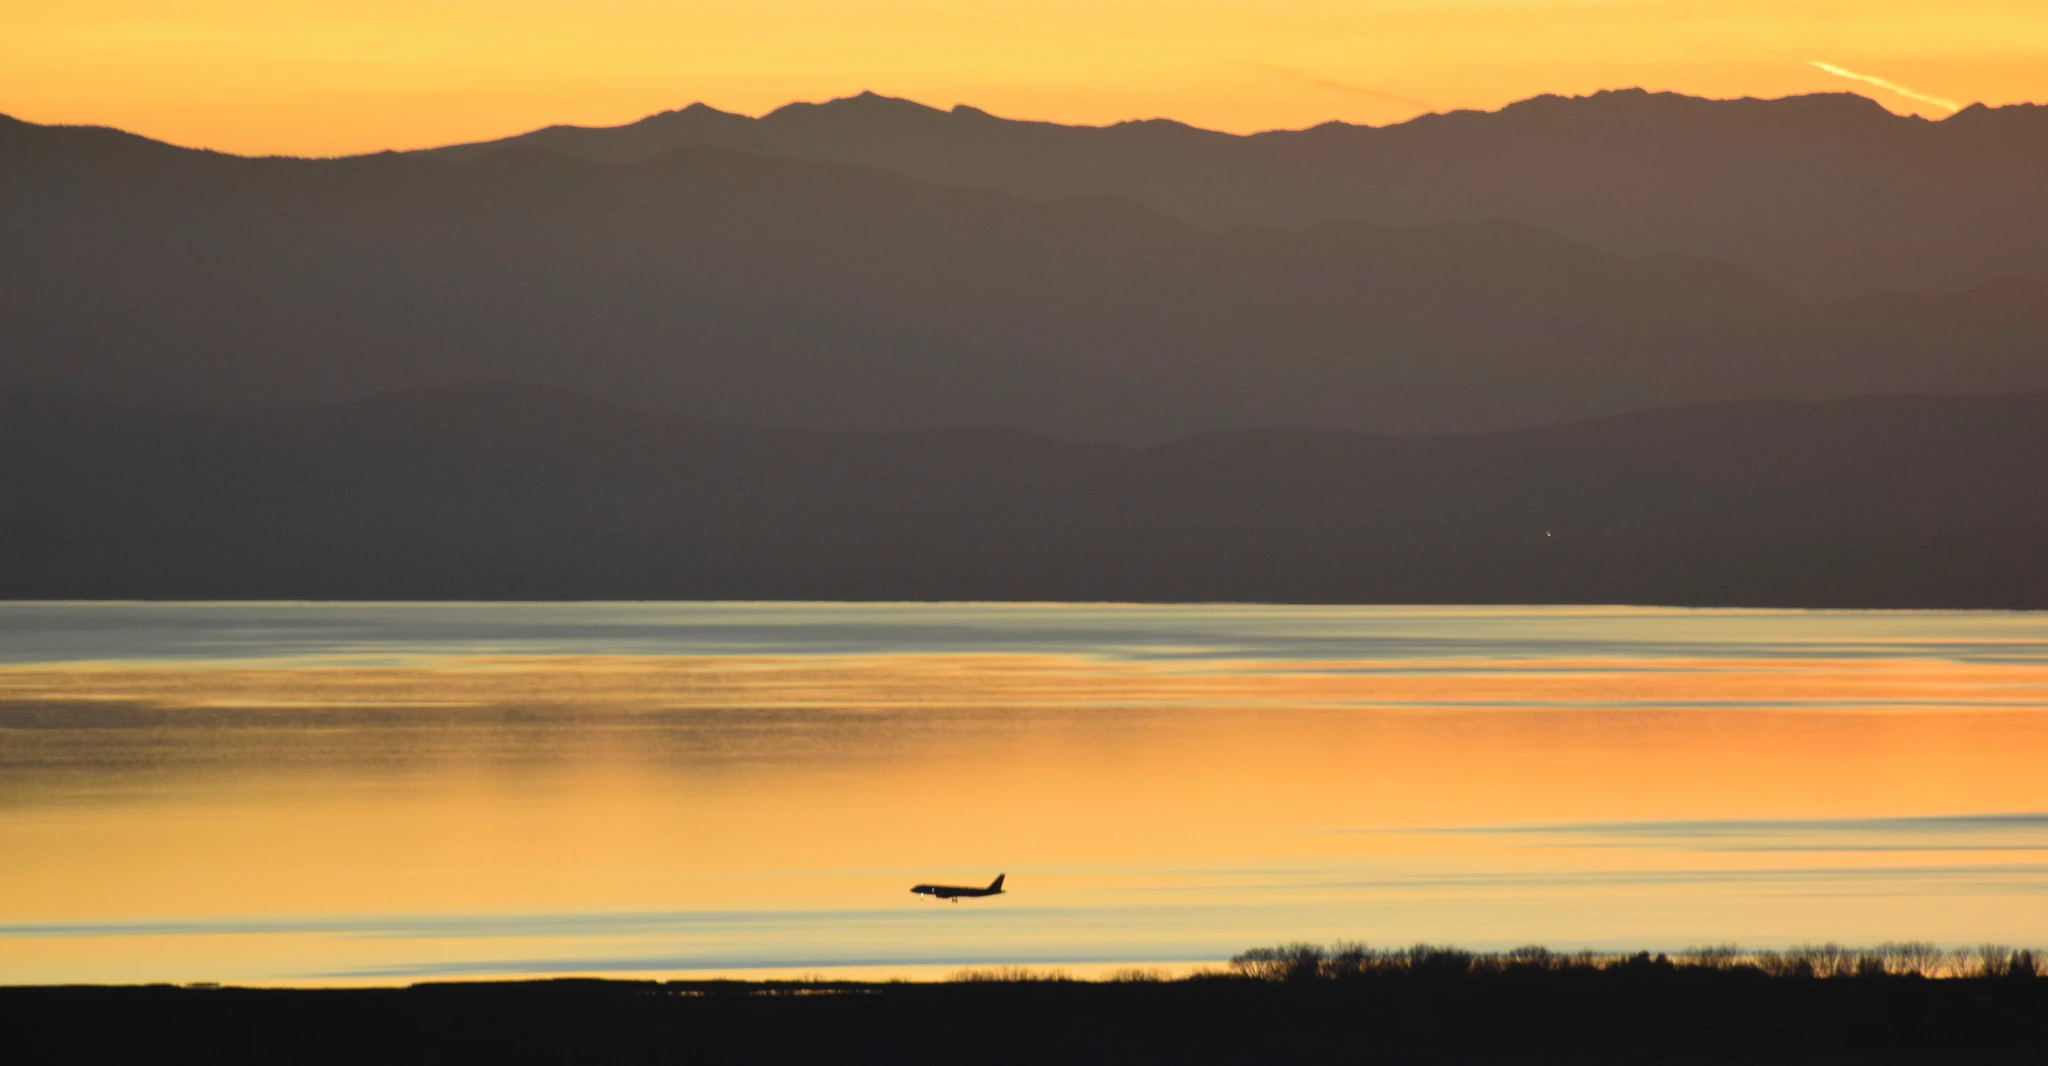 A plane flies low over a lake, which reflecs the orange sky of a sunset. The lake is backed by tall mountains which are given depth by the end of the day’s haze.